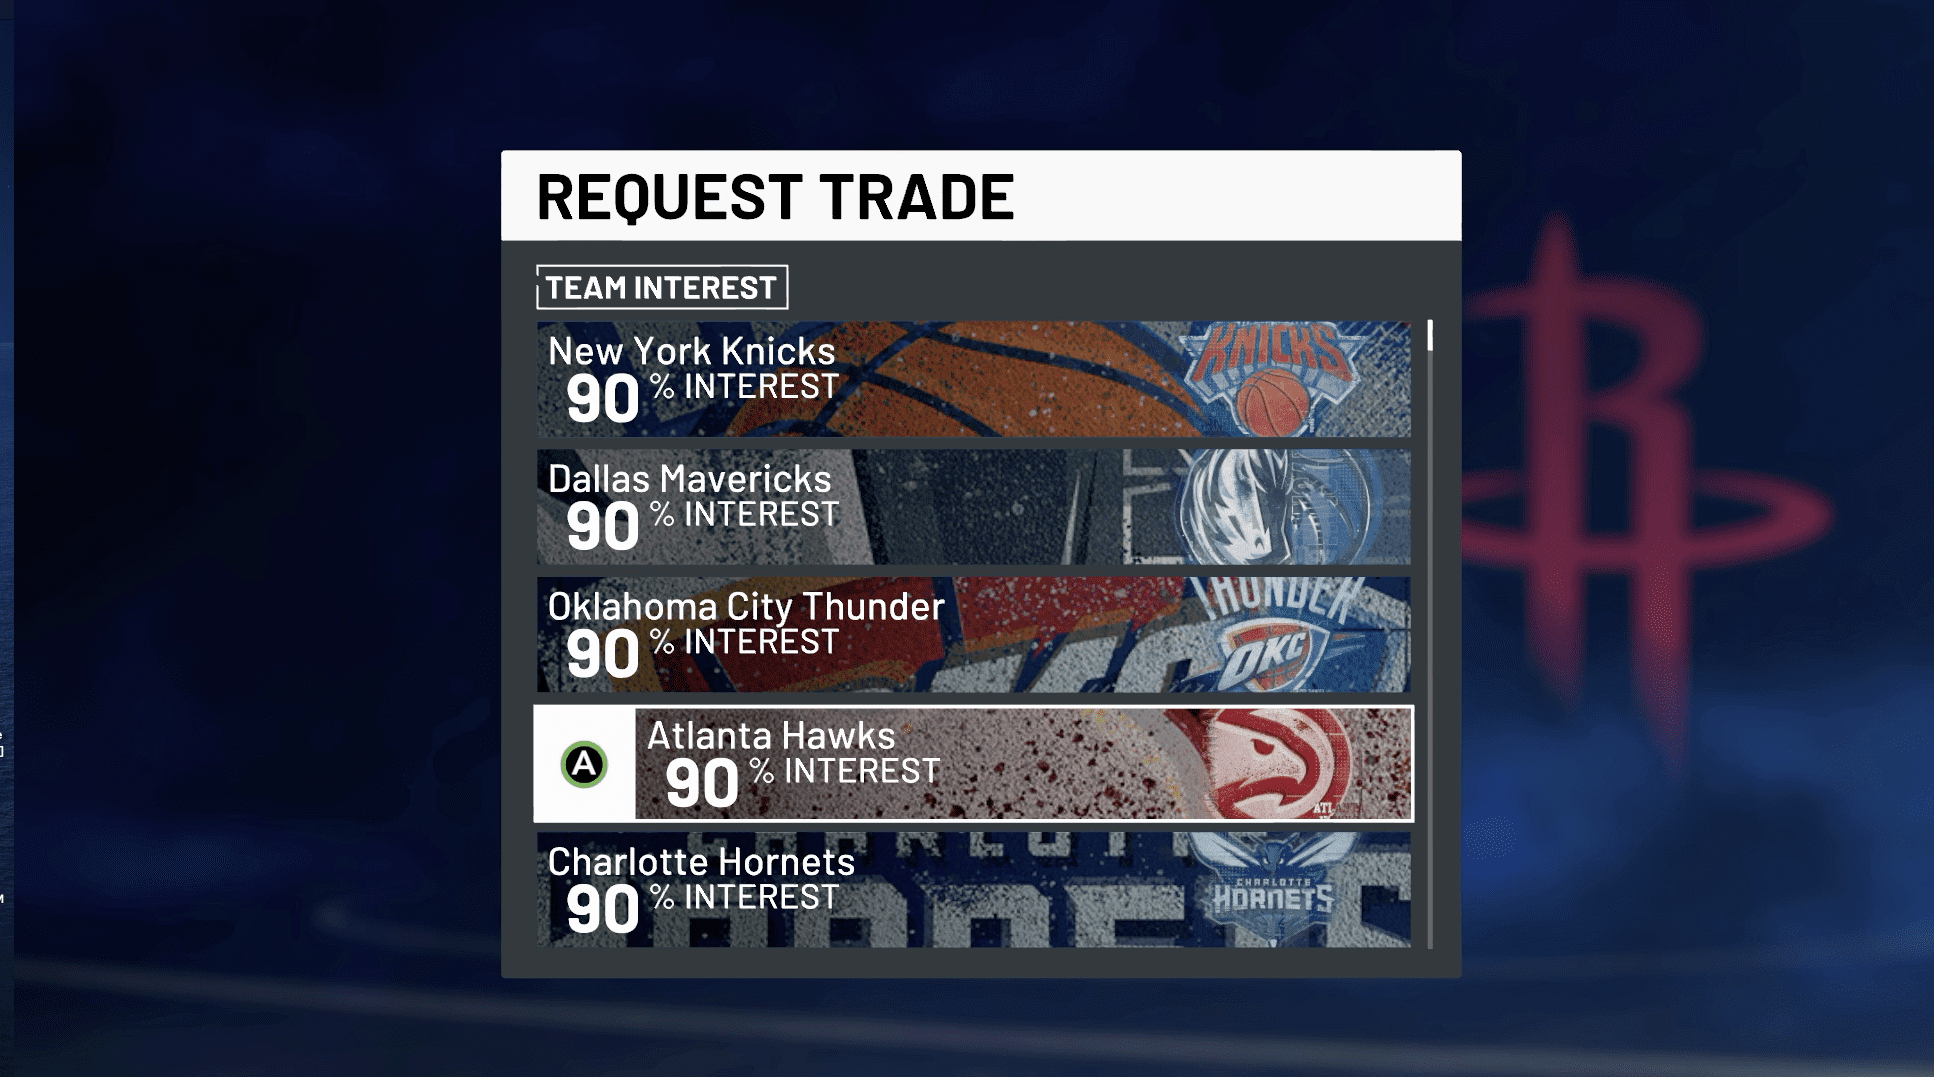 How to request a trade in nba 2k21